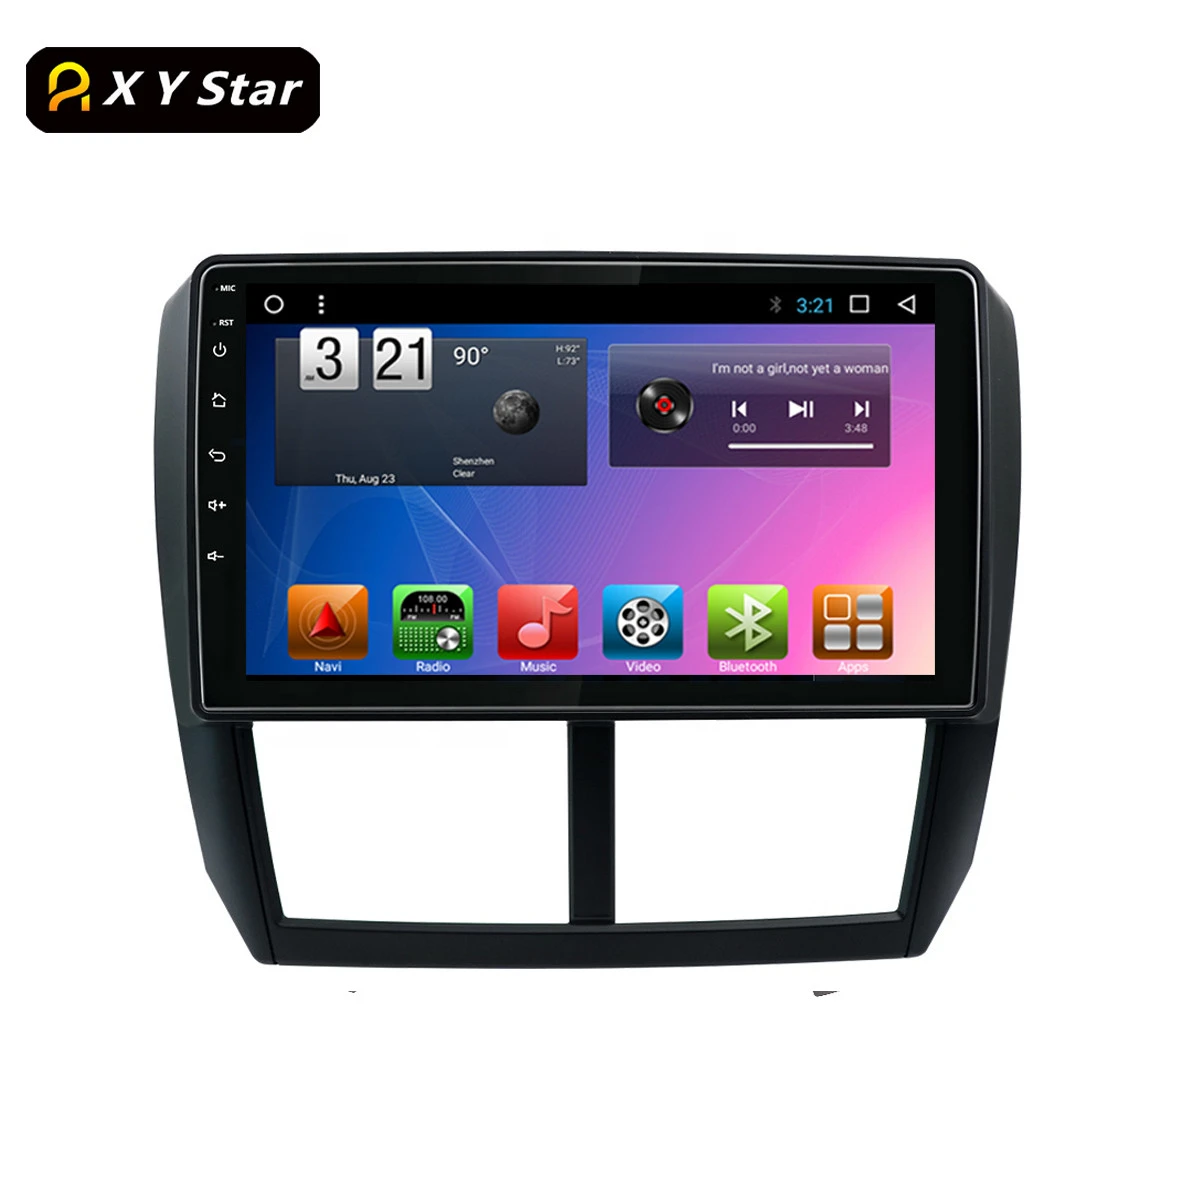 XYSTAR  XY-1014 Octa core Android 9.0 Car DVD Player GPS Navigation auto radio For  Forester 2008-2011